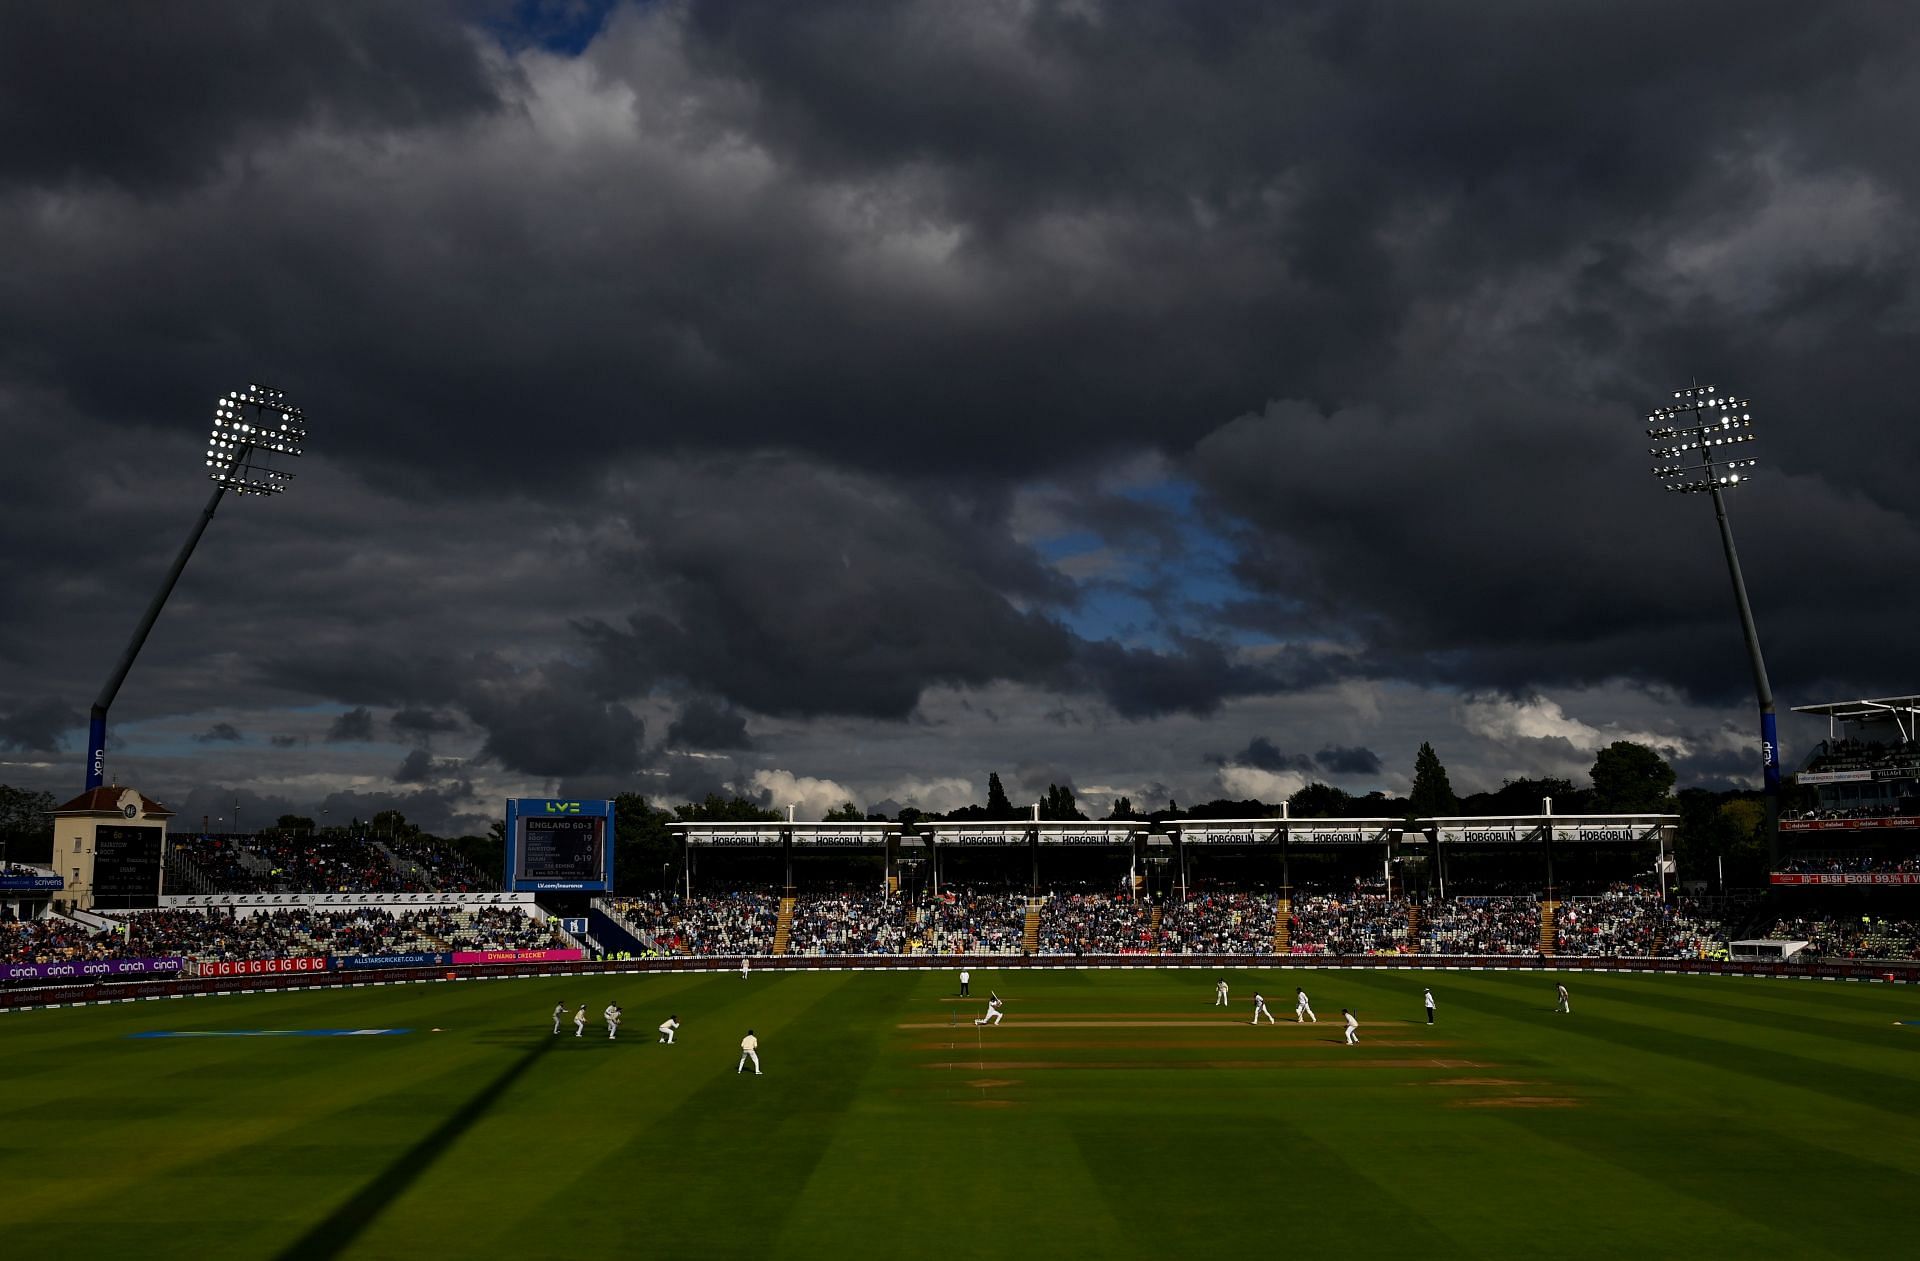 Joe Root of England bats under dark skies during Day 2 of the fifth Test between England and India. (Credit: Getty Images)